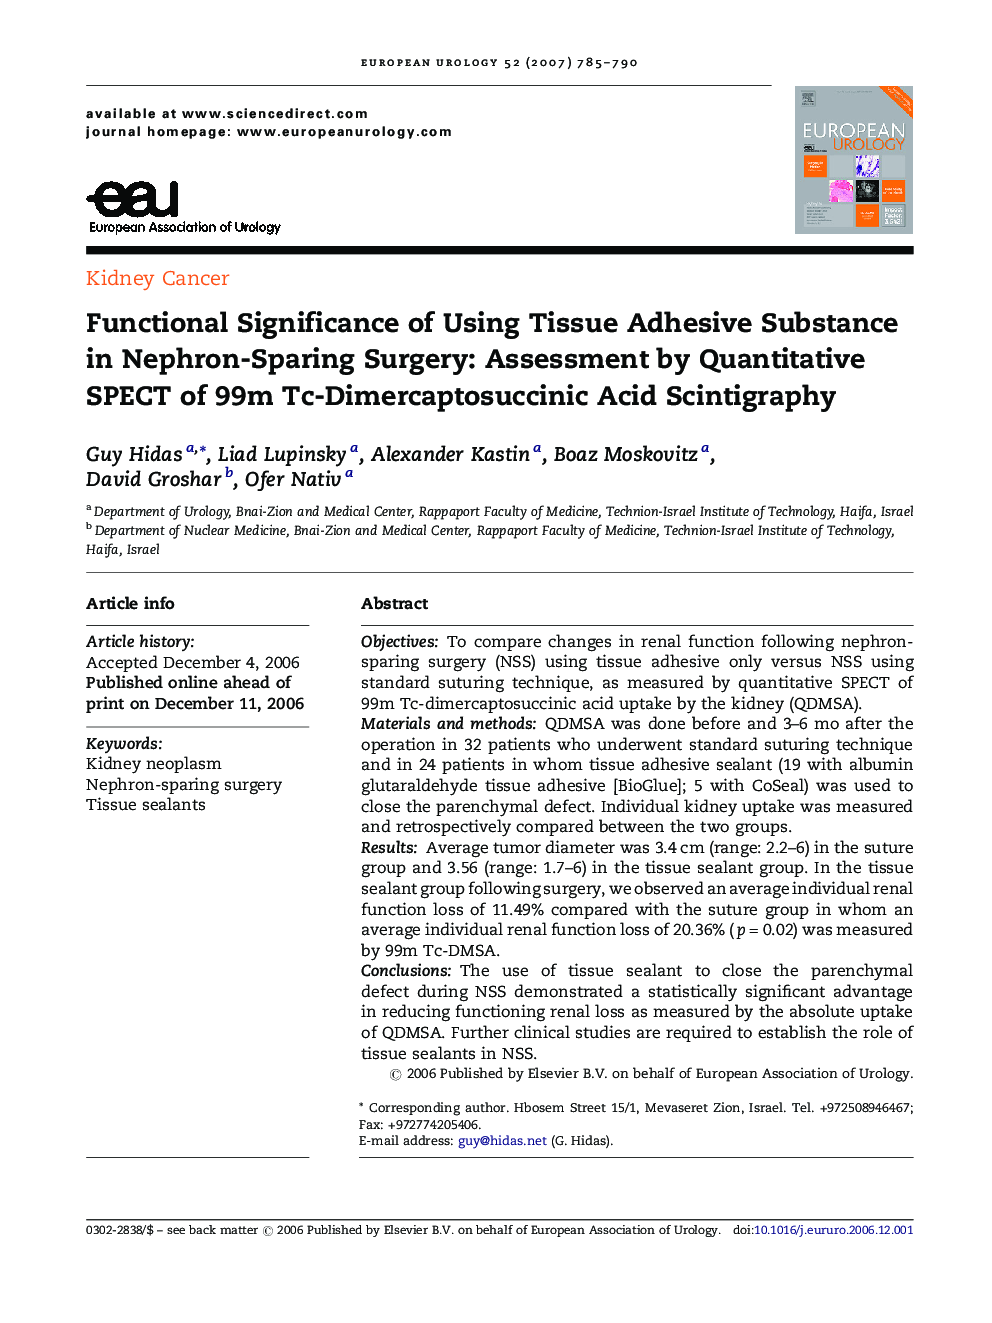 Functional Significance of Using Tissue Adhesive Substance in Nephron-Sparing Surgery: Assessment by Quantitative SPECT of 99m Tc-Dimercaptosuccinic Acid Scintigraphy